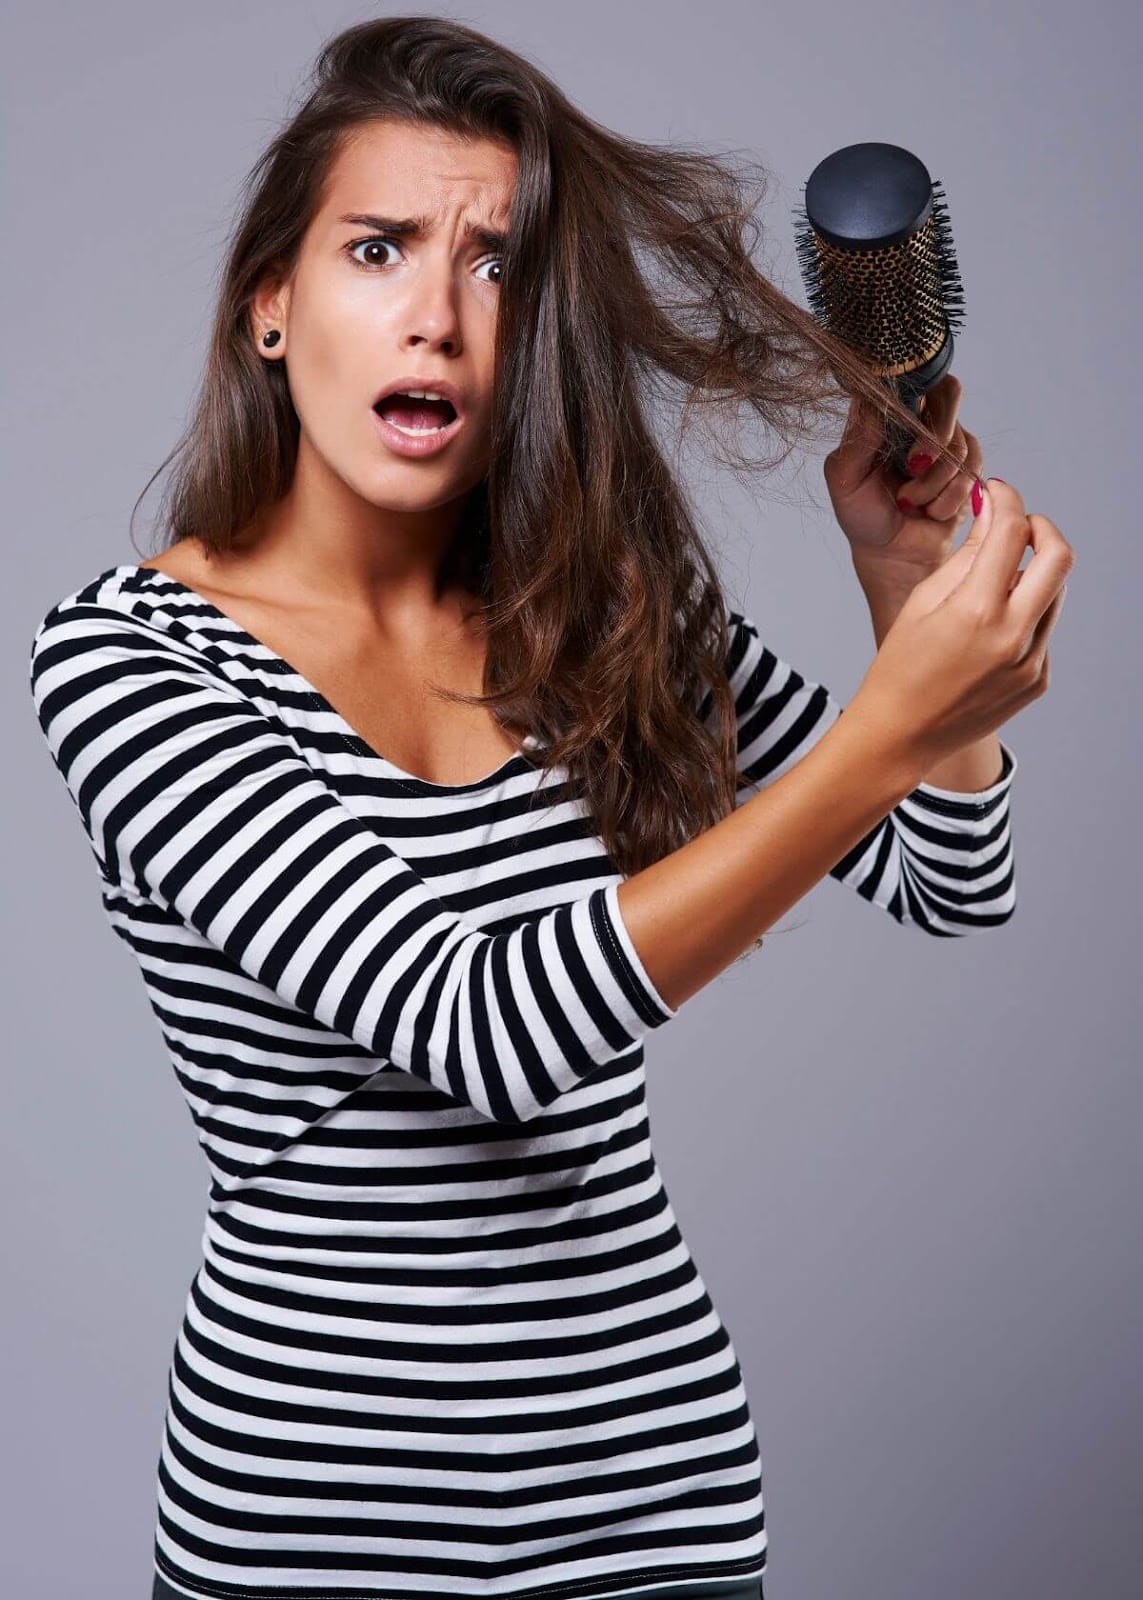 How Can I Control Frizz Naturally?